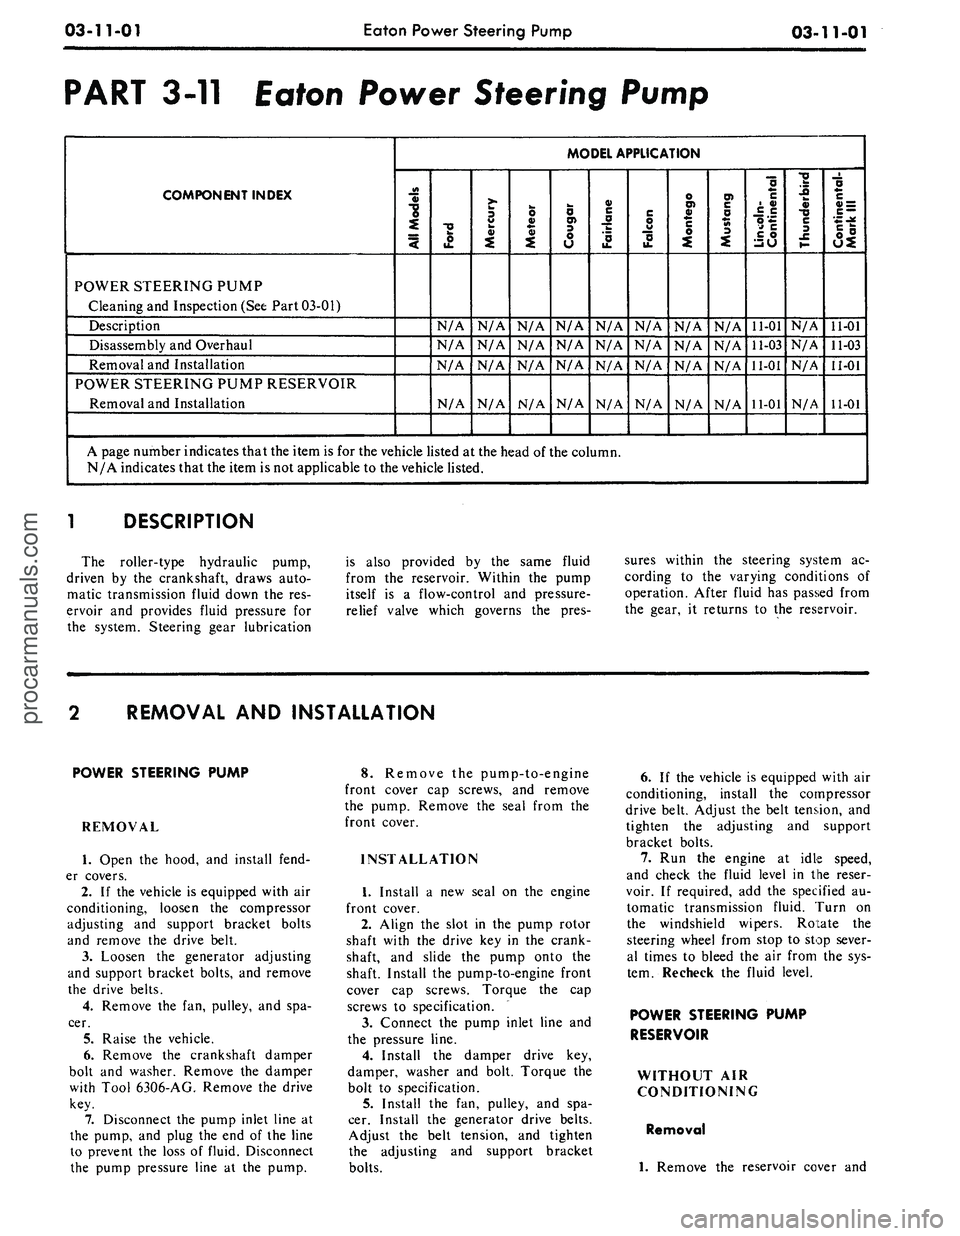 FORD MUSTANG 1969  Volume One Chassis 
03-11-01 
Eaton Power Steering Pump

03-11-01

PART 3-11 Eaton Power Steering Pump

COMPONENT INDEX 
MODEL APPLICATION

3 
§> 
"o

4

POWER STEERING PUMP

Cleaning and Inspection (See Part 03-01)

D